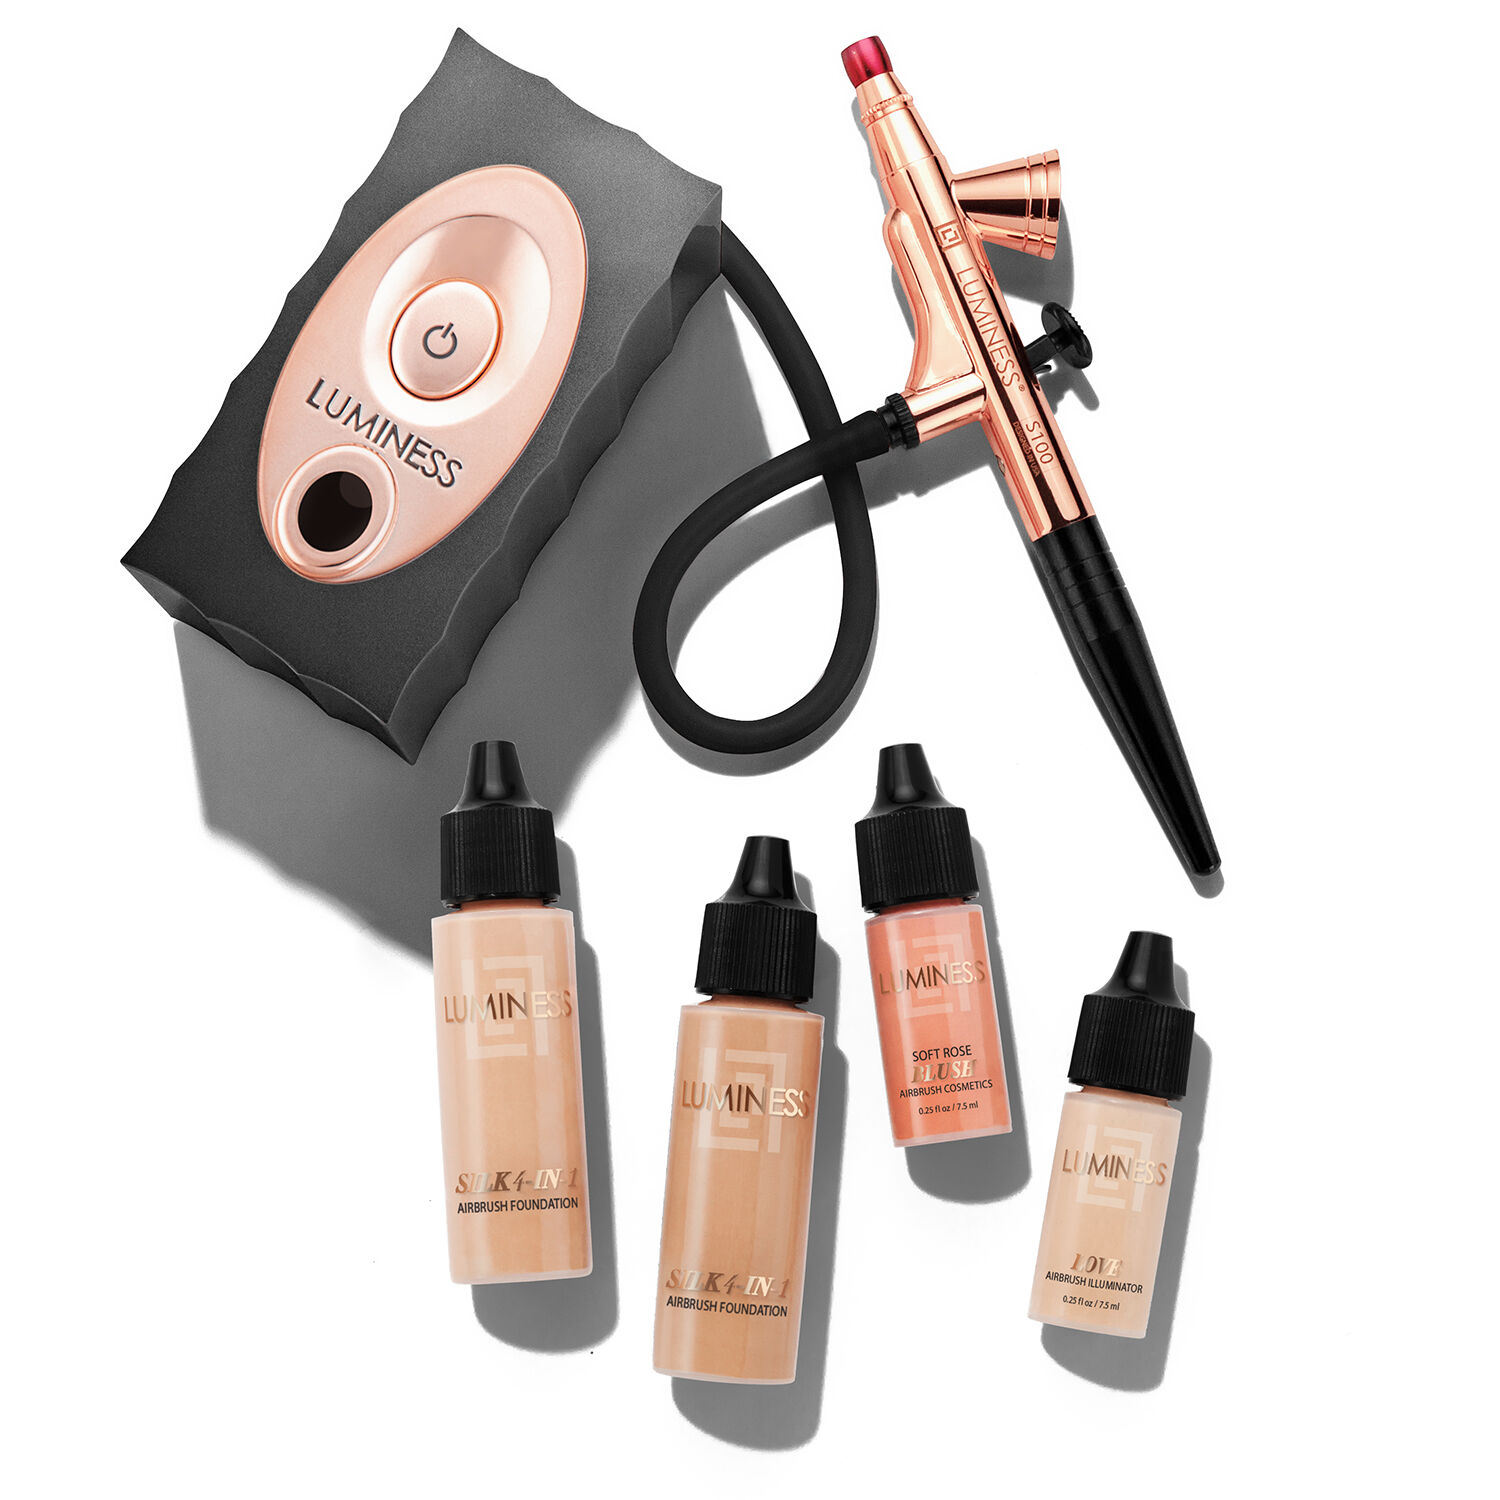 Luminess airbrush Makeup kit with compressor and paint